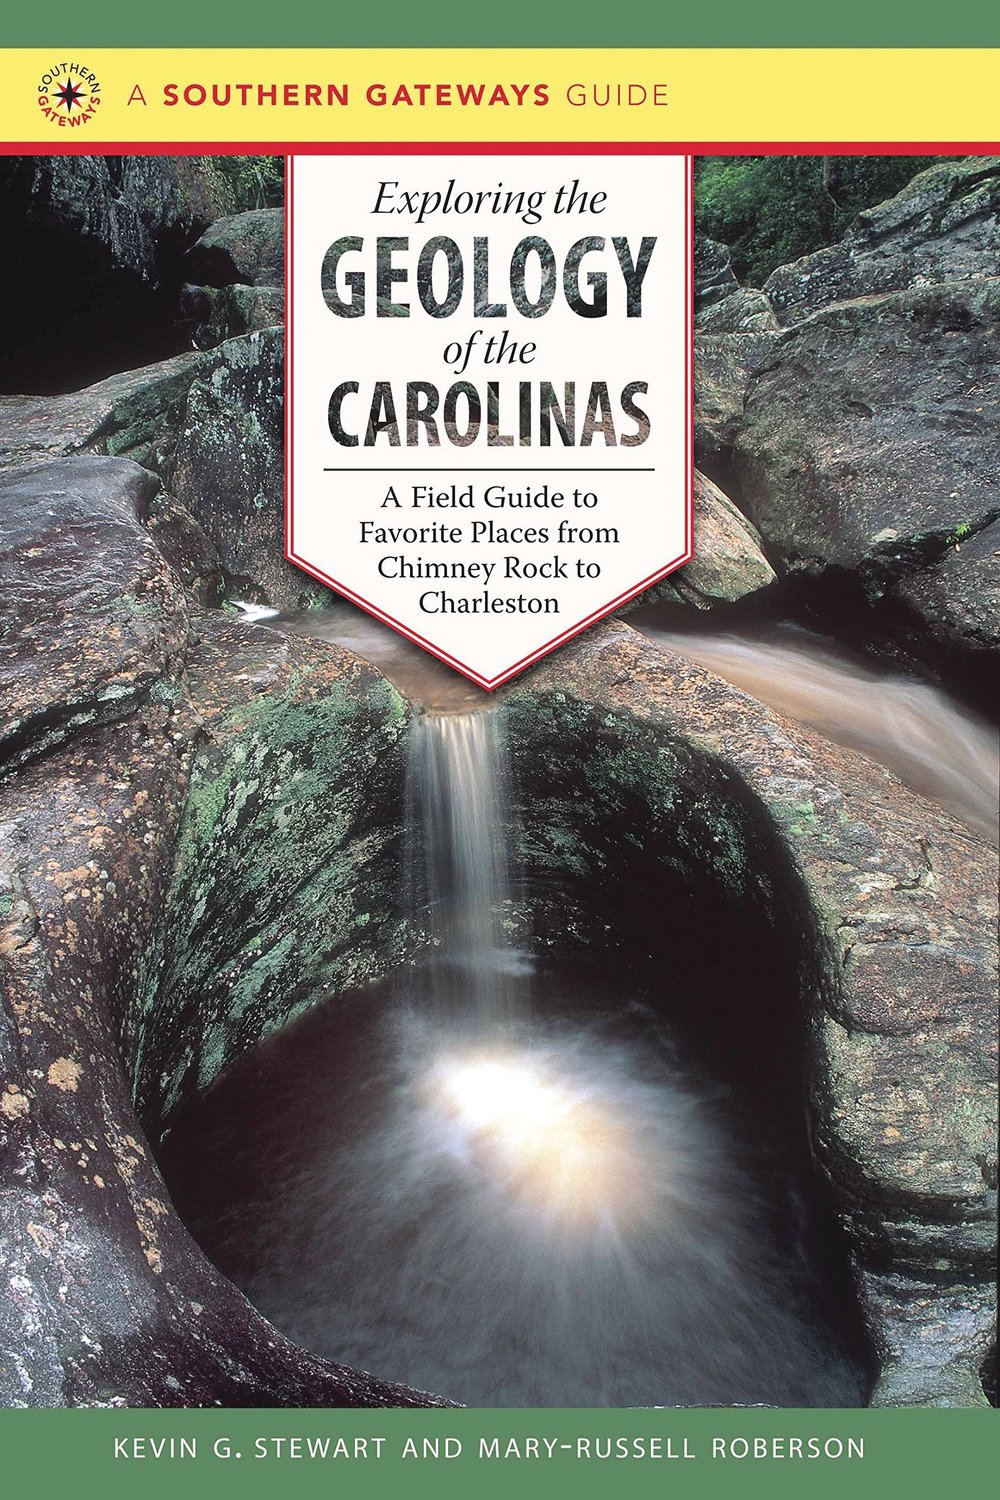 Stewart's book includes 31 'field trips' to sites of geological interest in the Carolinas.